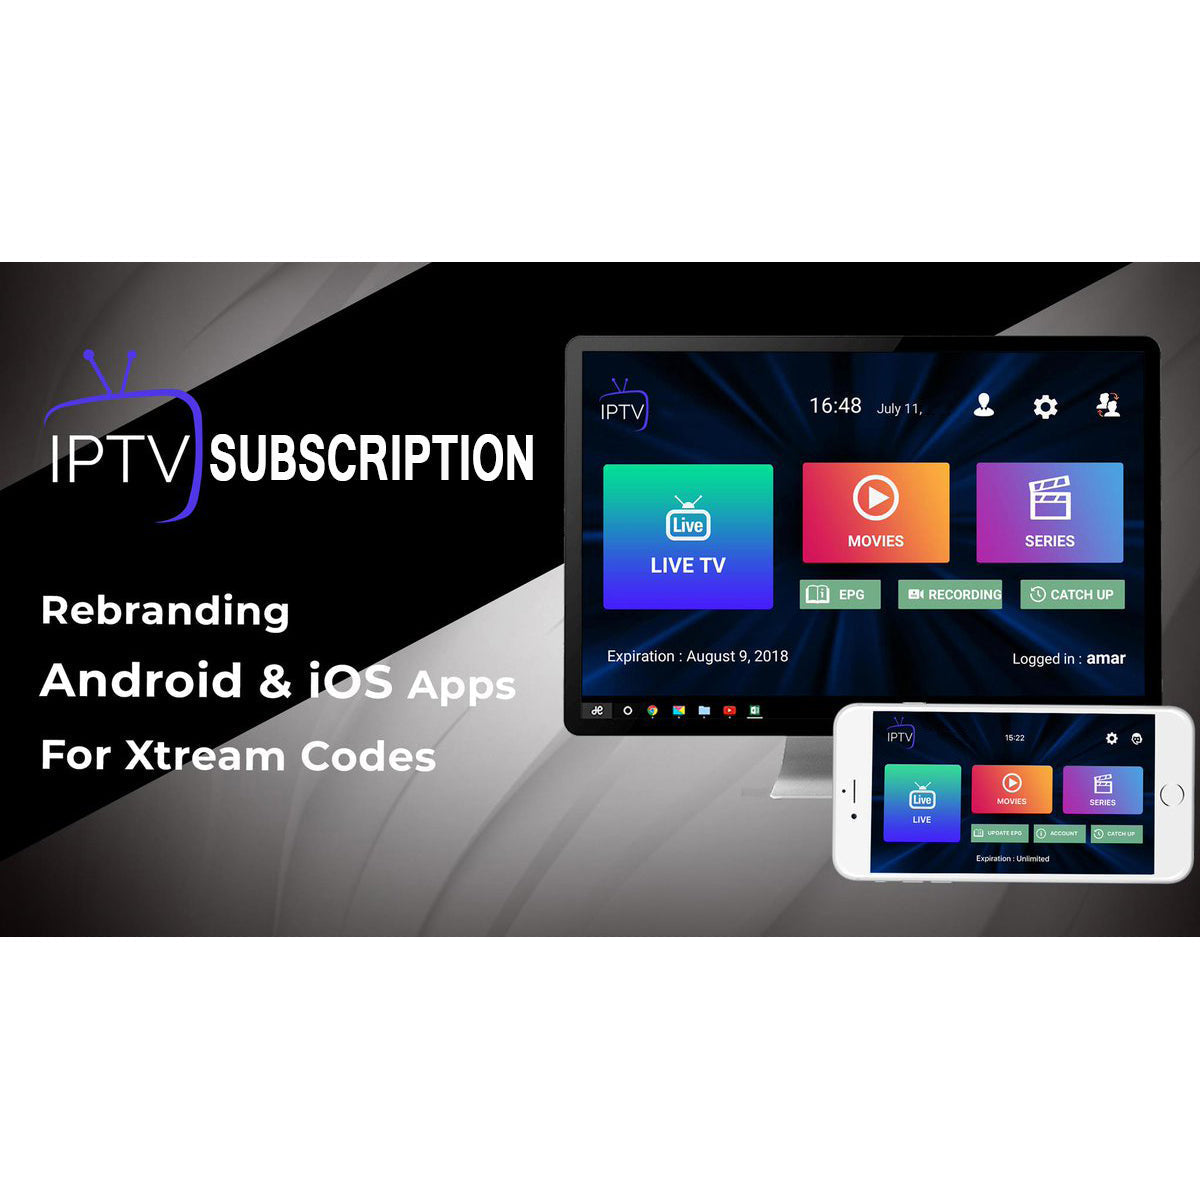 HD World IPTV With +9200 Live TV ,+ 5500 Video-On-Demand And Smart EPG TV Guide